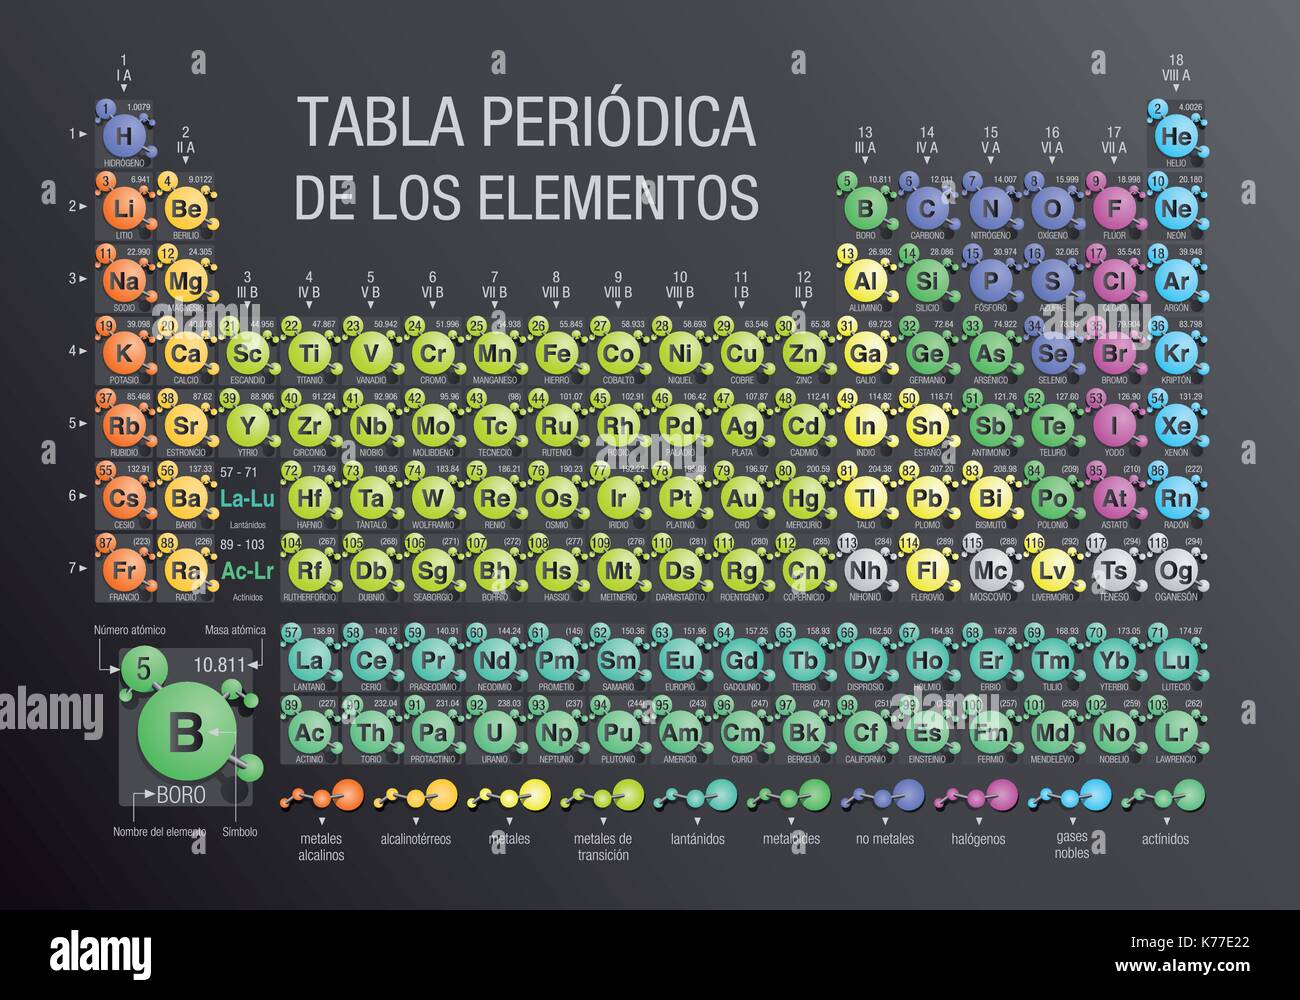 TABLA PERIODICA DE LOS ELEMENTOS -Periodic Table of Elements in Spanish language- formed by molecules in gray background with the 4 new elements Stock Vector